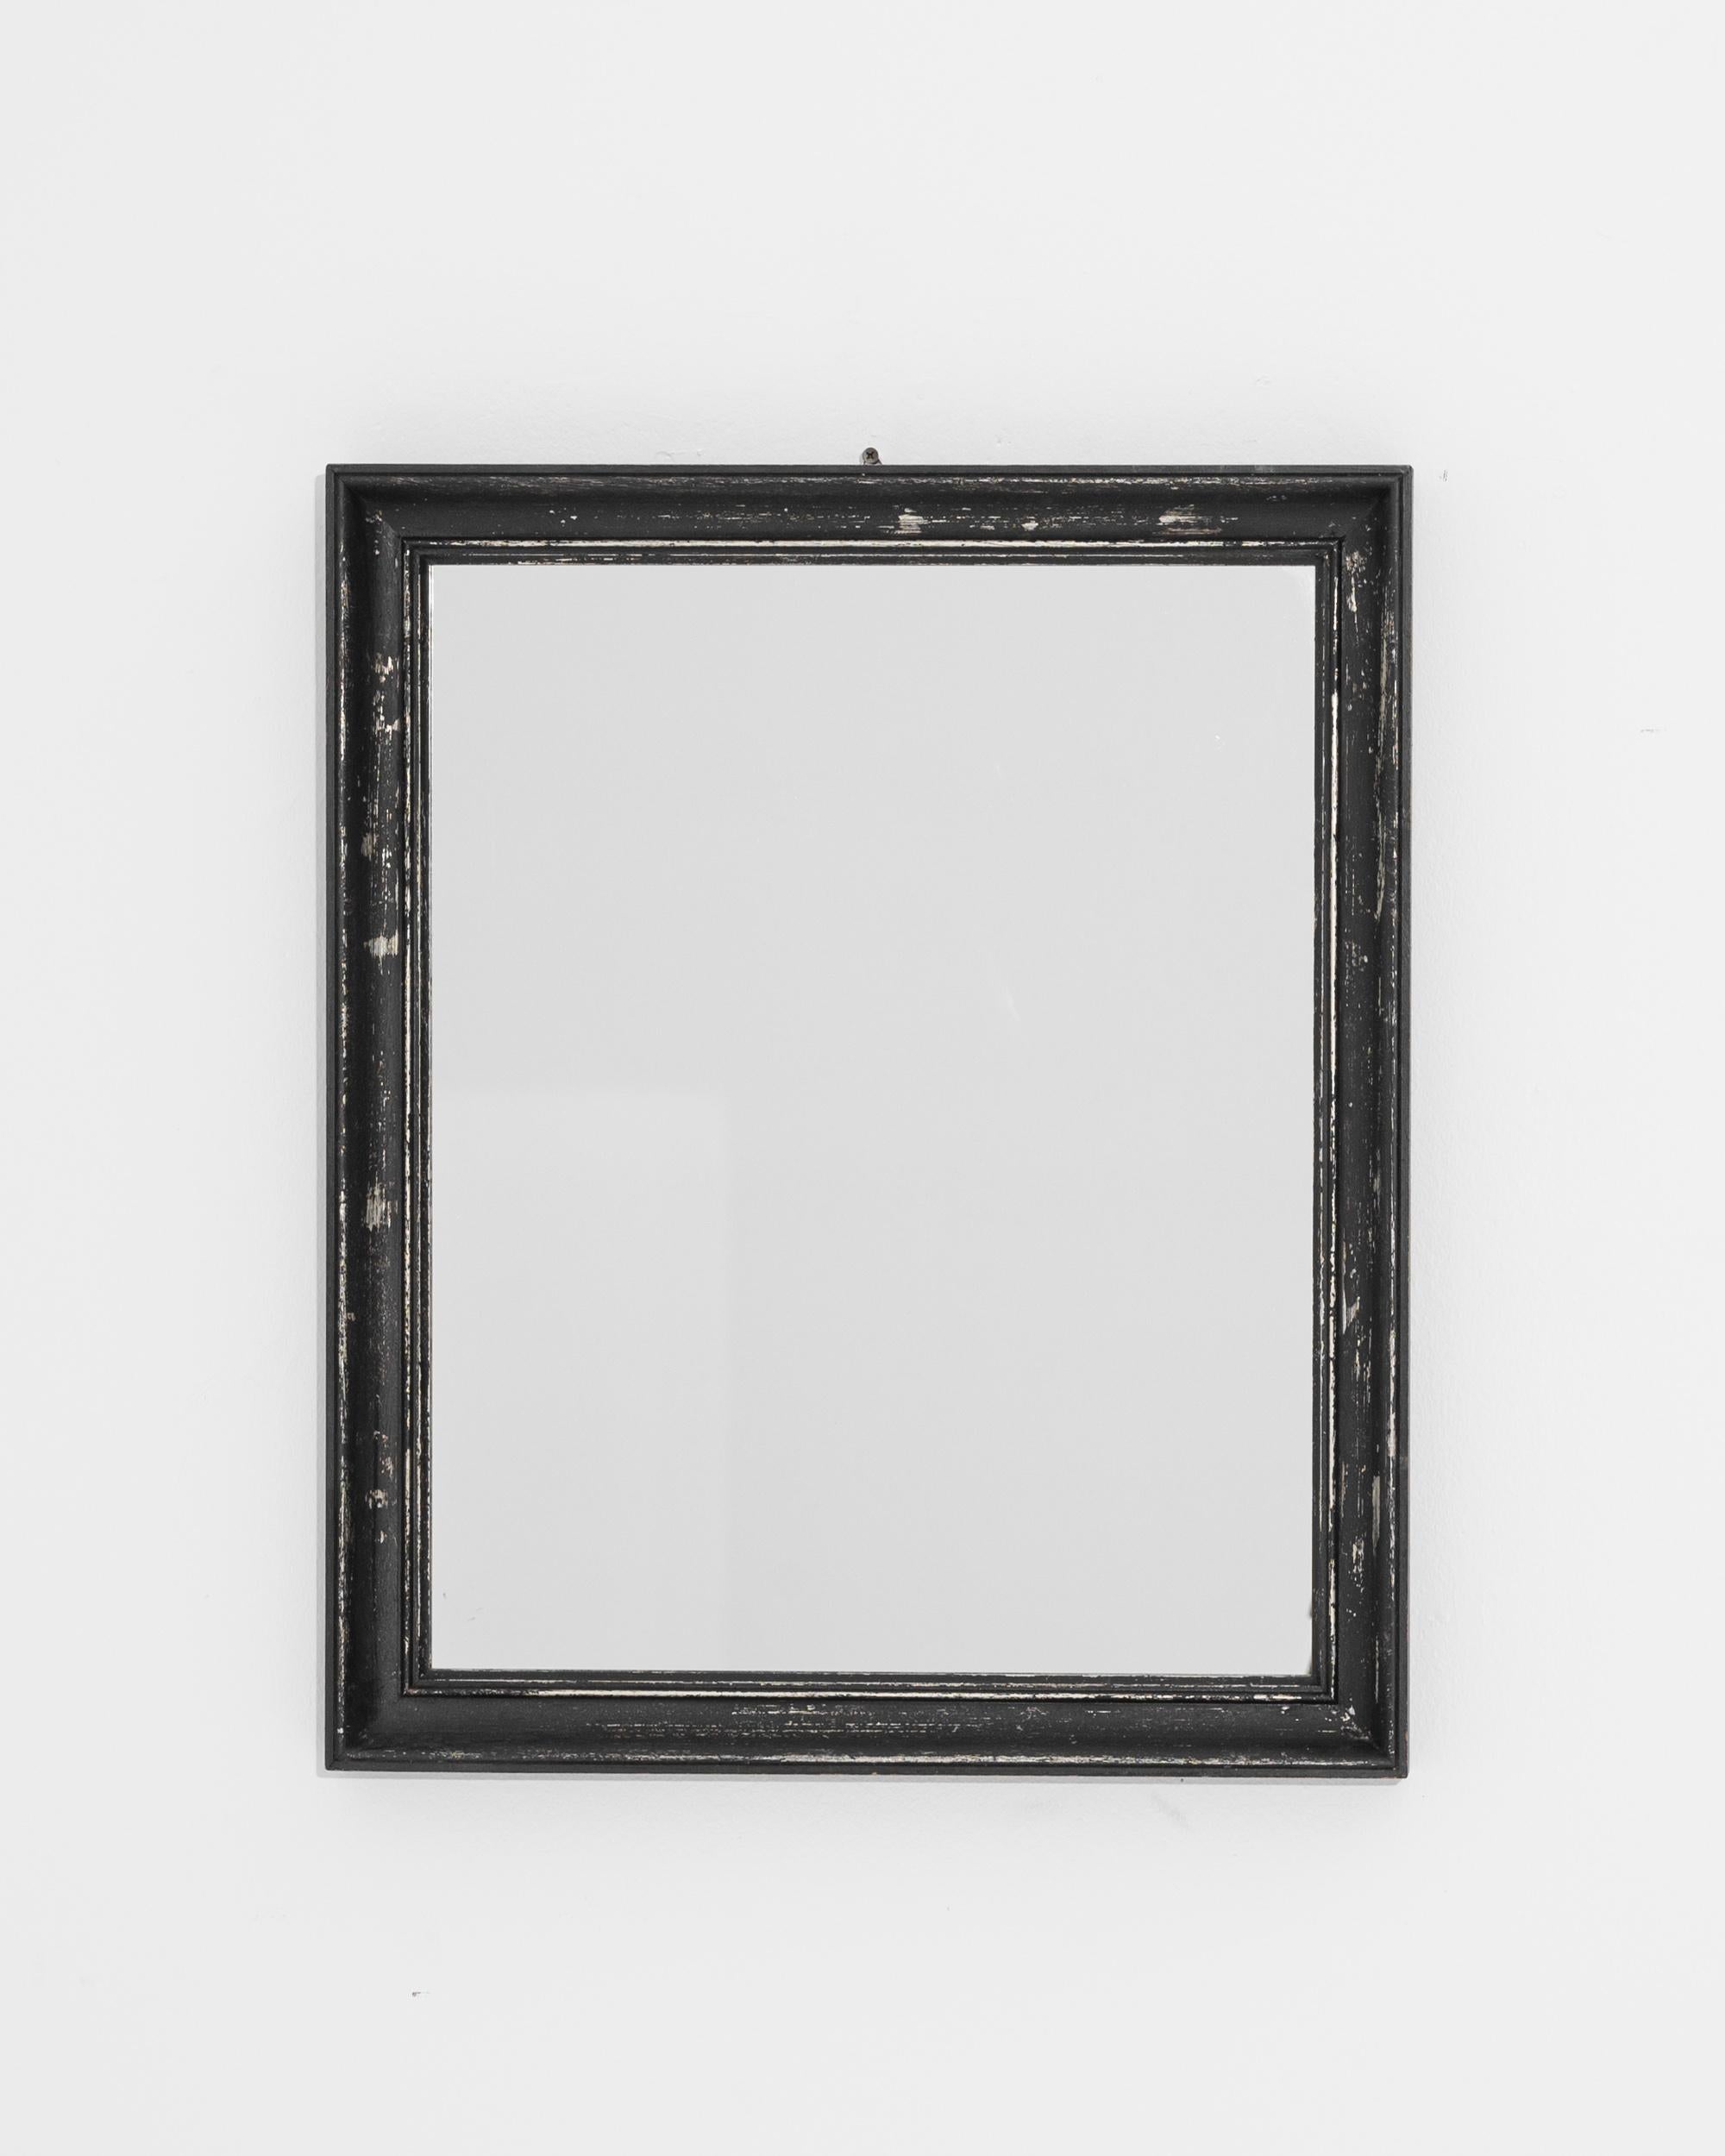 This antique wooden mirror was produced in France, circa 1900. A rectangular wooden frame is carved with a concave profile, a functional statement piece that imparts an elegant simplicity. Slightly patinated, the lustrous black paint reveals white